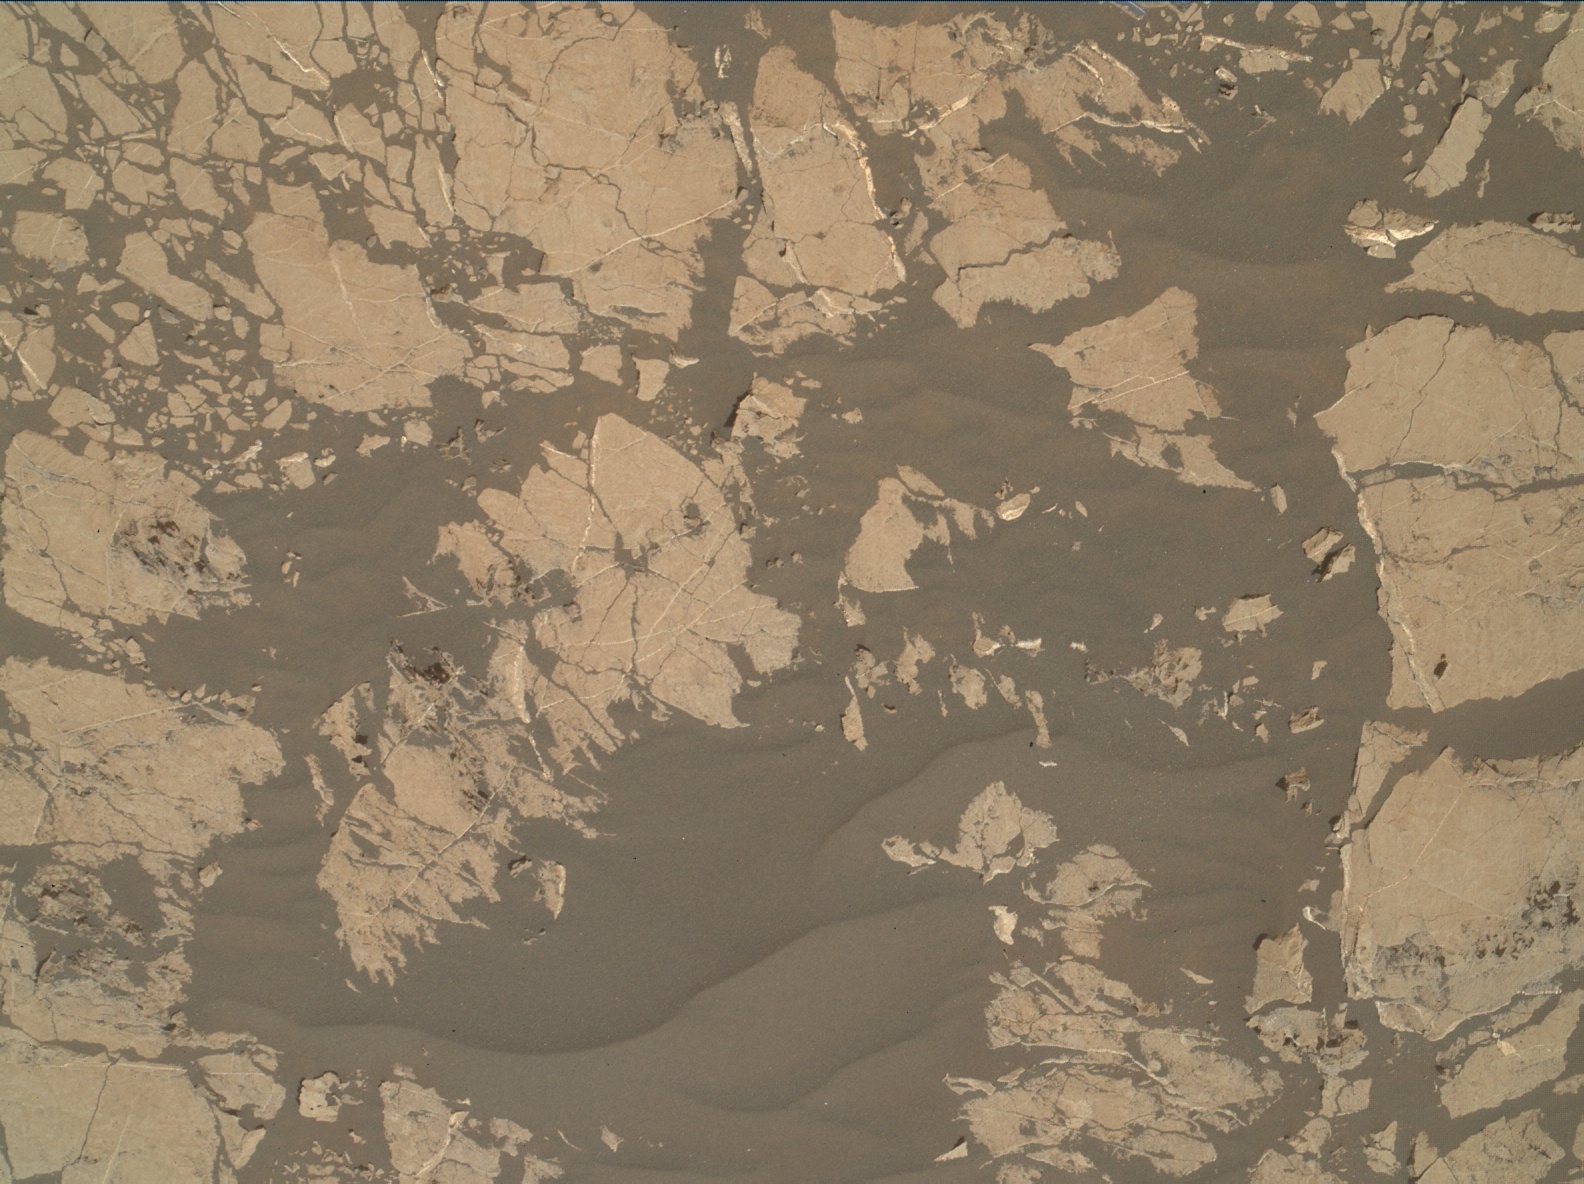 Nasa's Mars rover Curiosity acquired this image using its Mars Hand Lens Imager (MAHLI) on Sol 3070